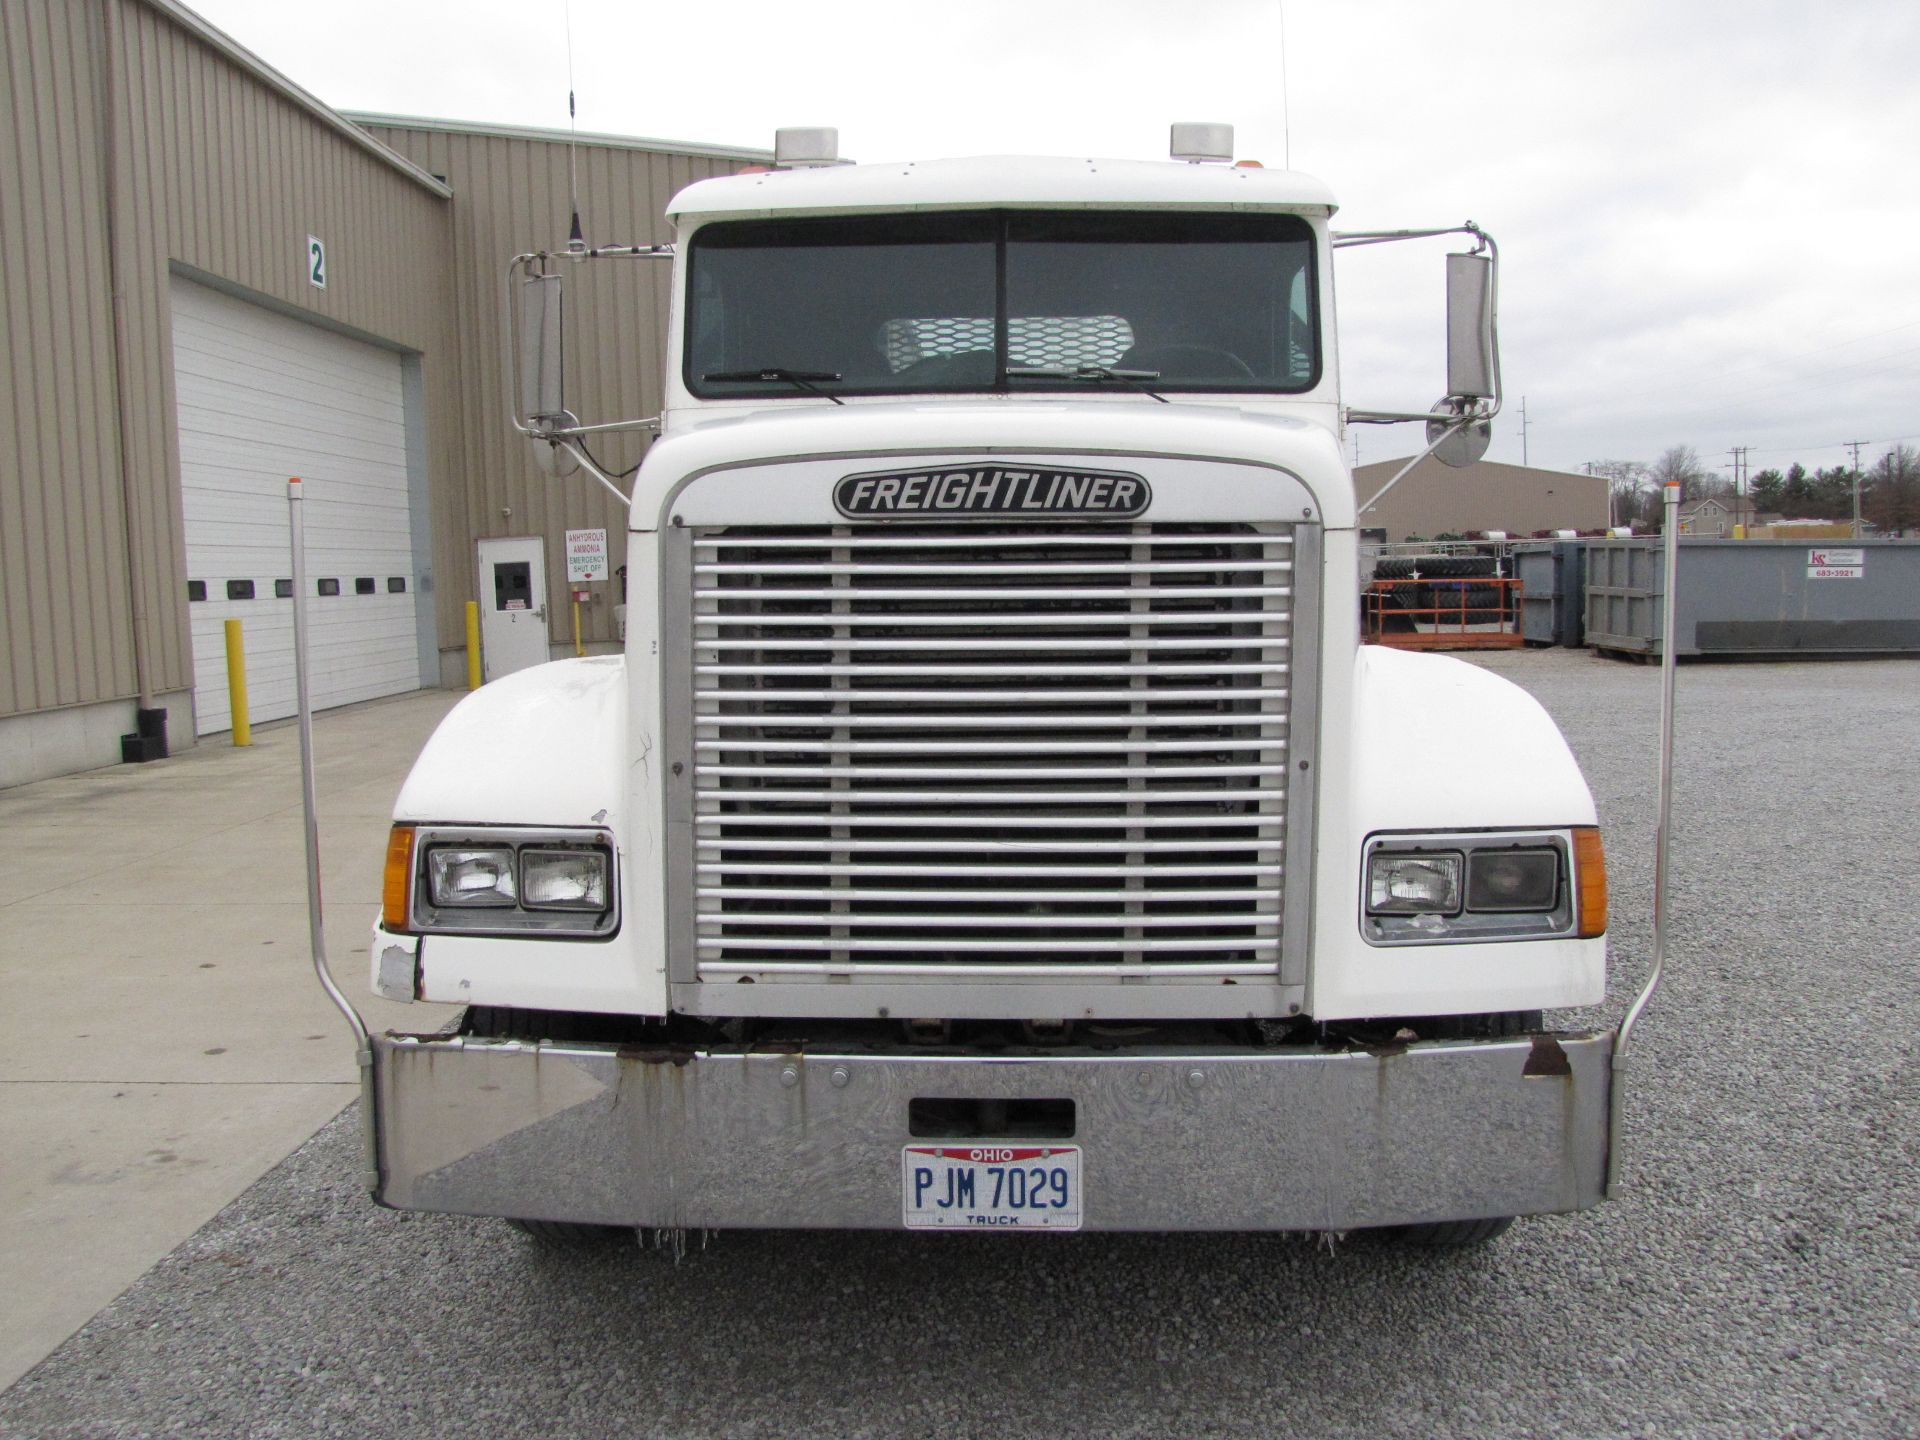 1993 Freightliner FLD120 semi truck - Image 15 of 71